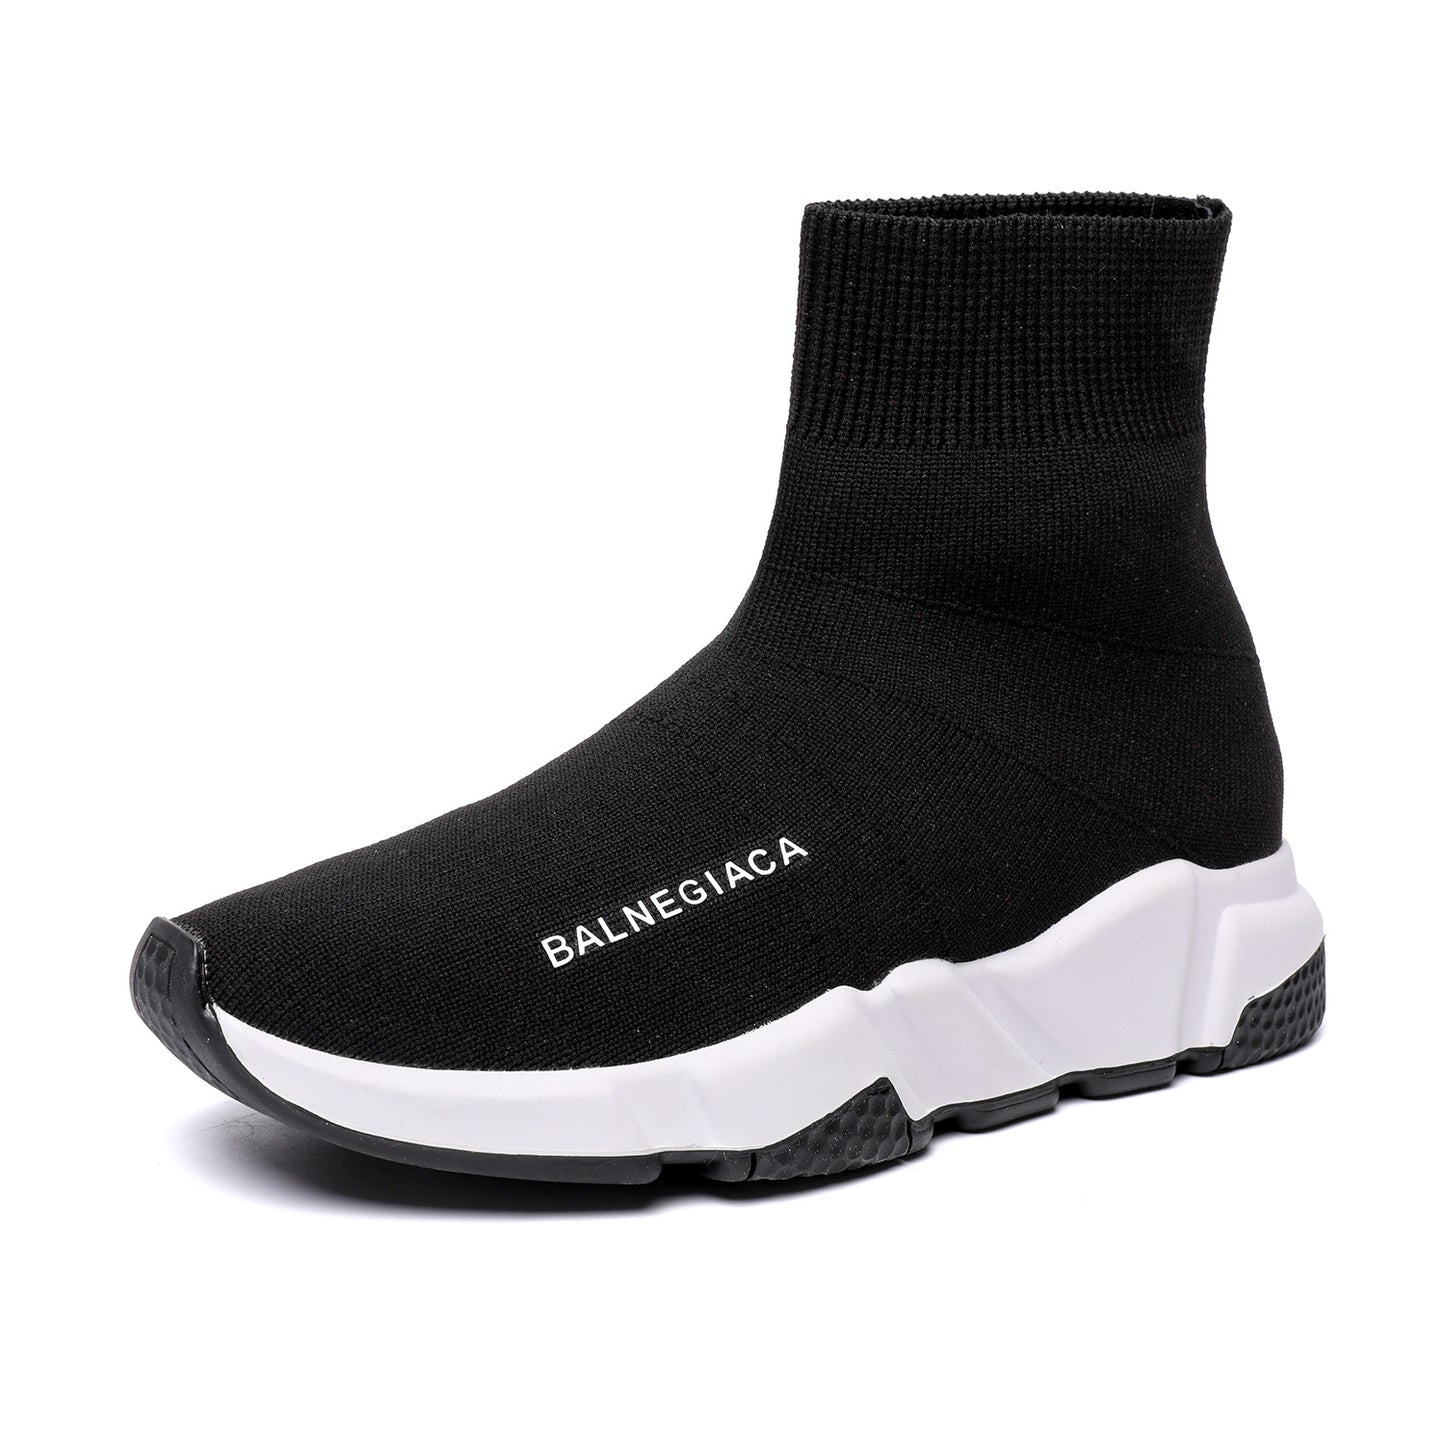 Super hot socks shoes women and men new high-top casual shoes